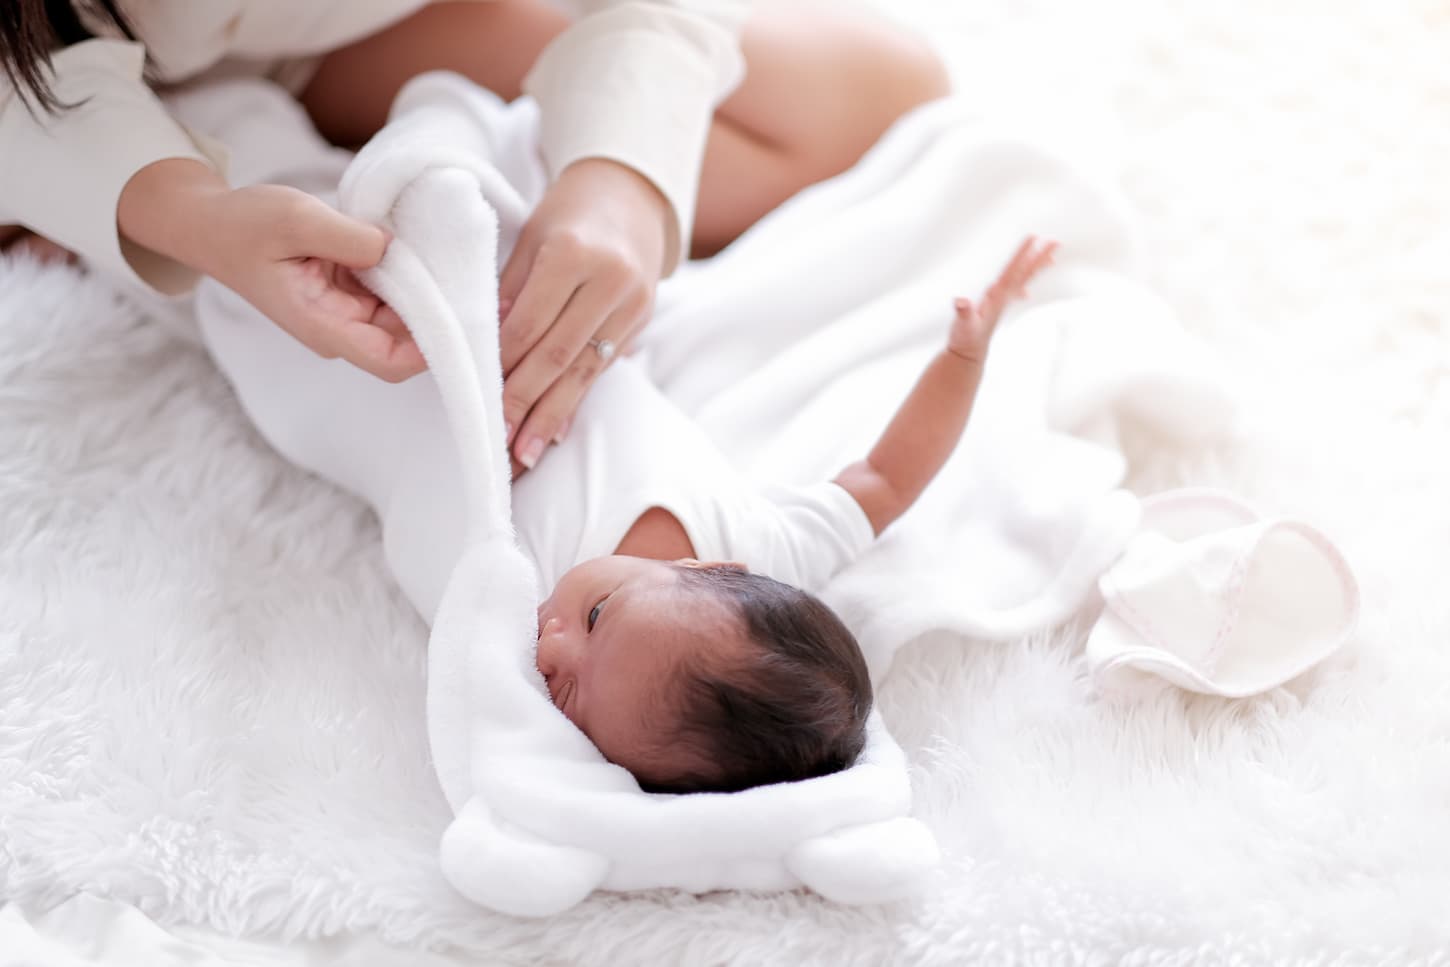 An image of a mother while swaddling her newborn baby with a white cloth on the bed.